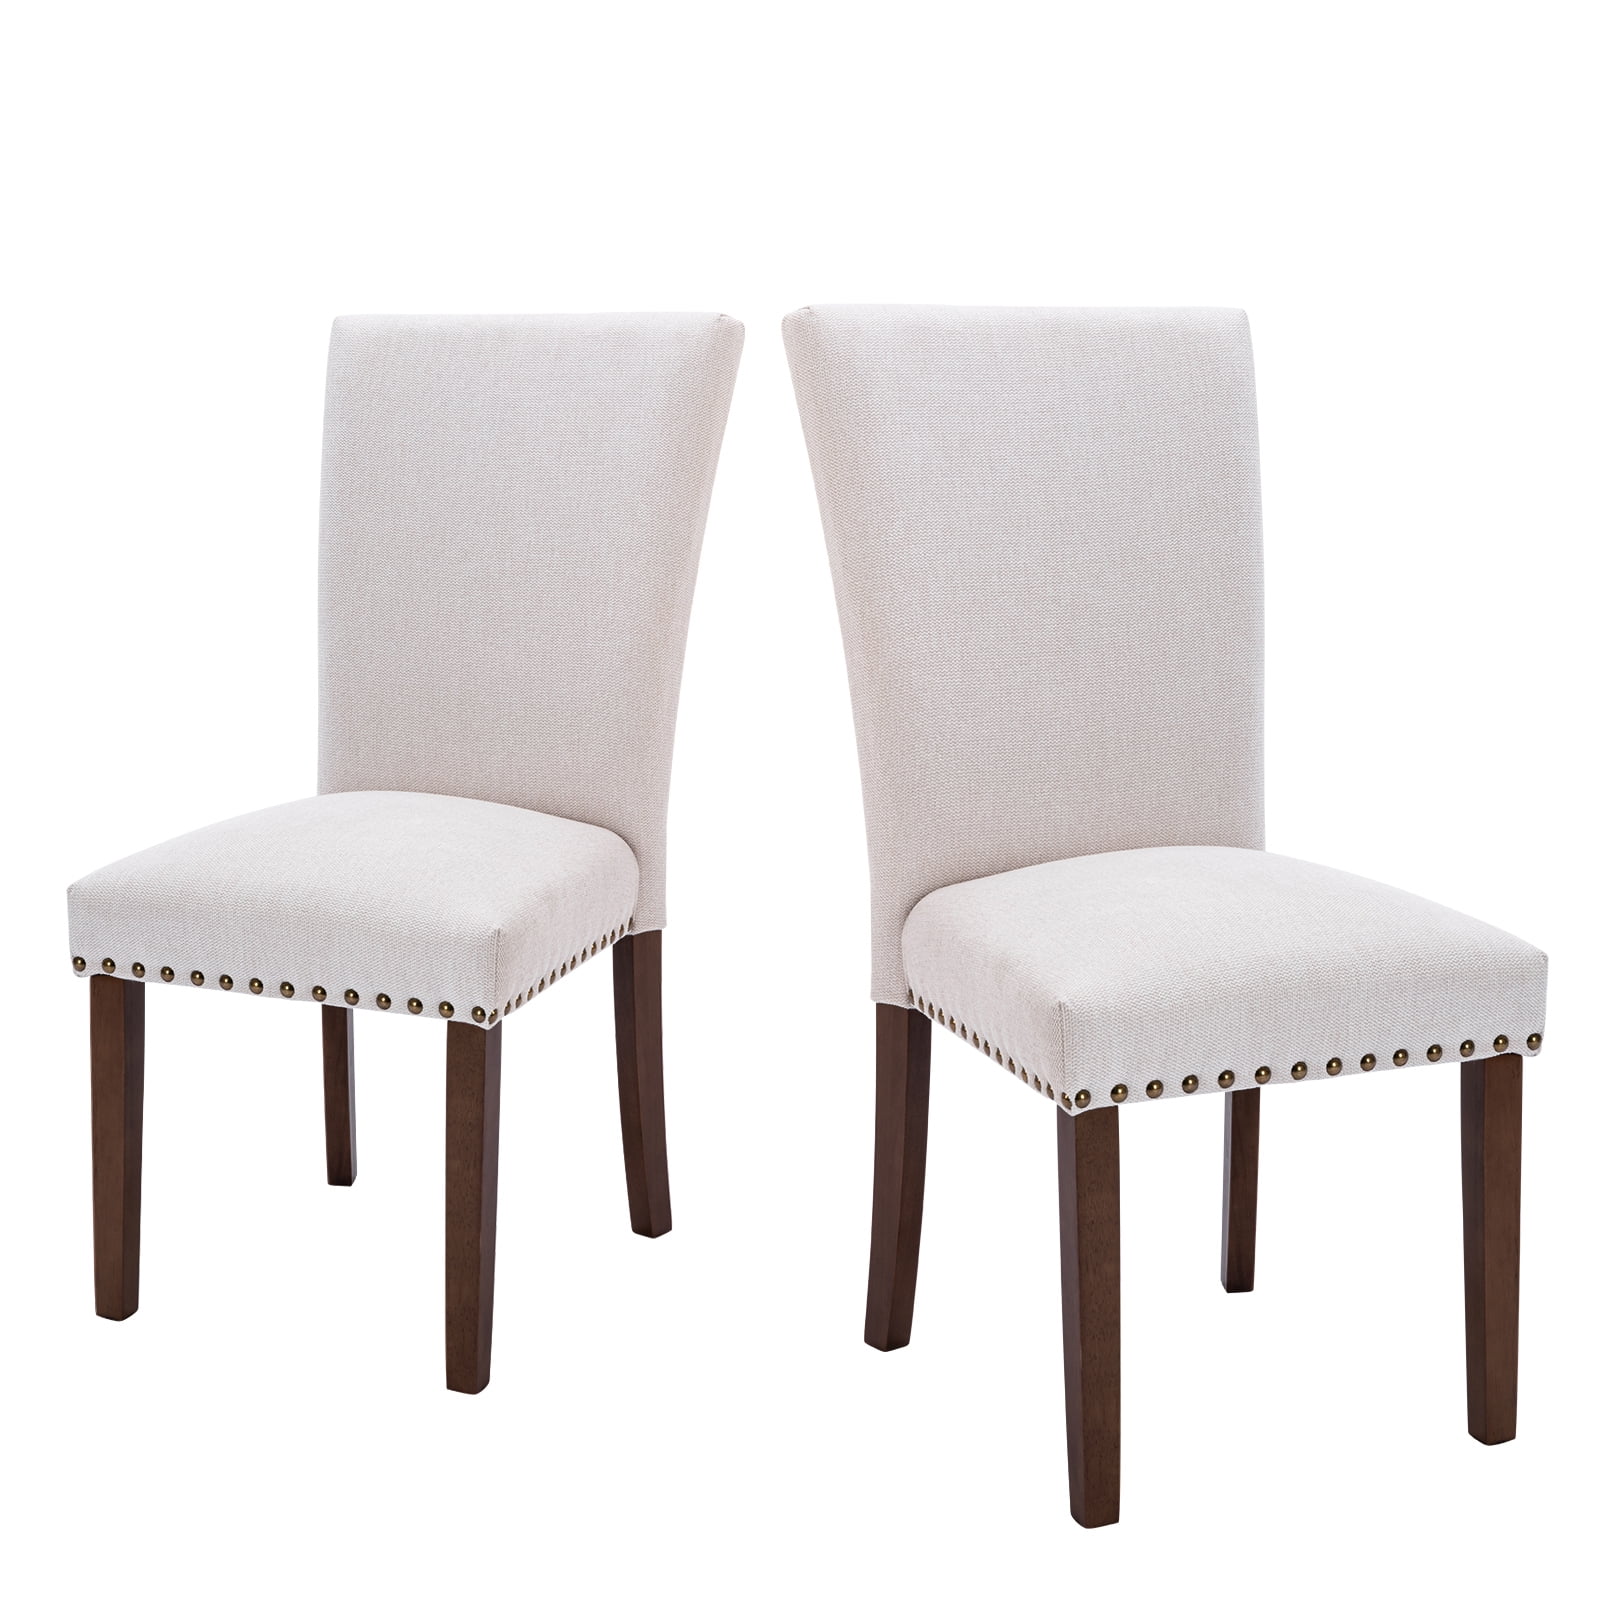 COLAMY Upholstered Dining Chairs Set of 2, Fabric Dining Room Chairs ...